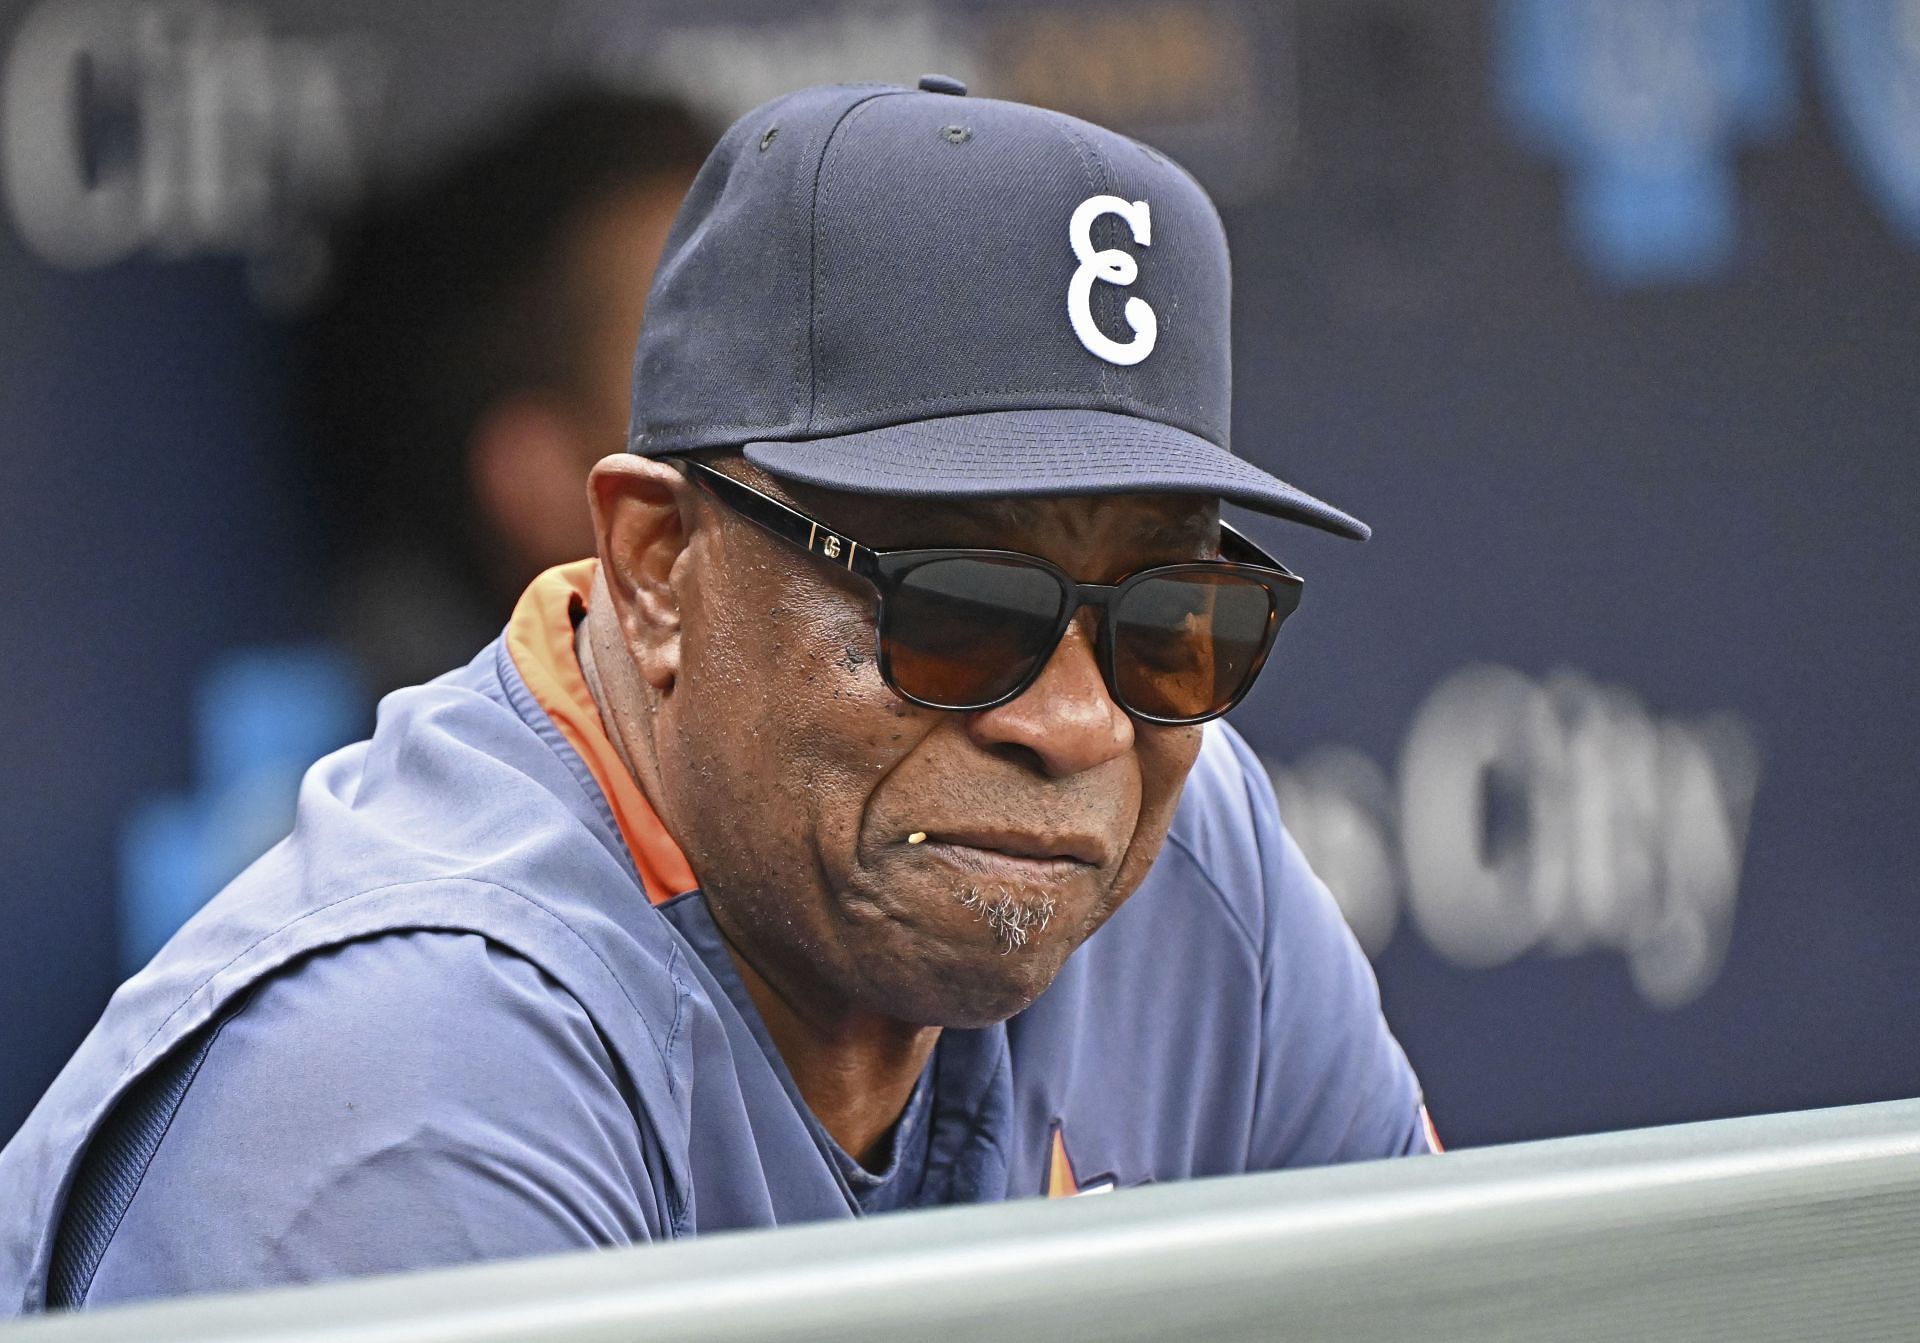 Dusty Baker and the Astros are likely going to the postseason soon